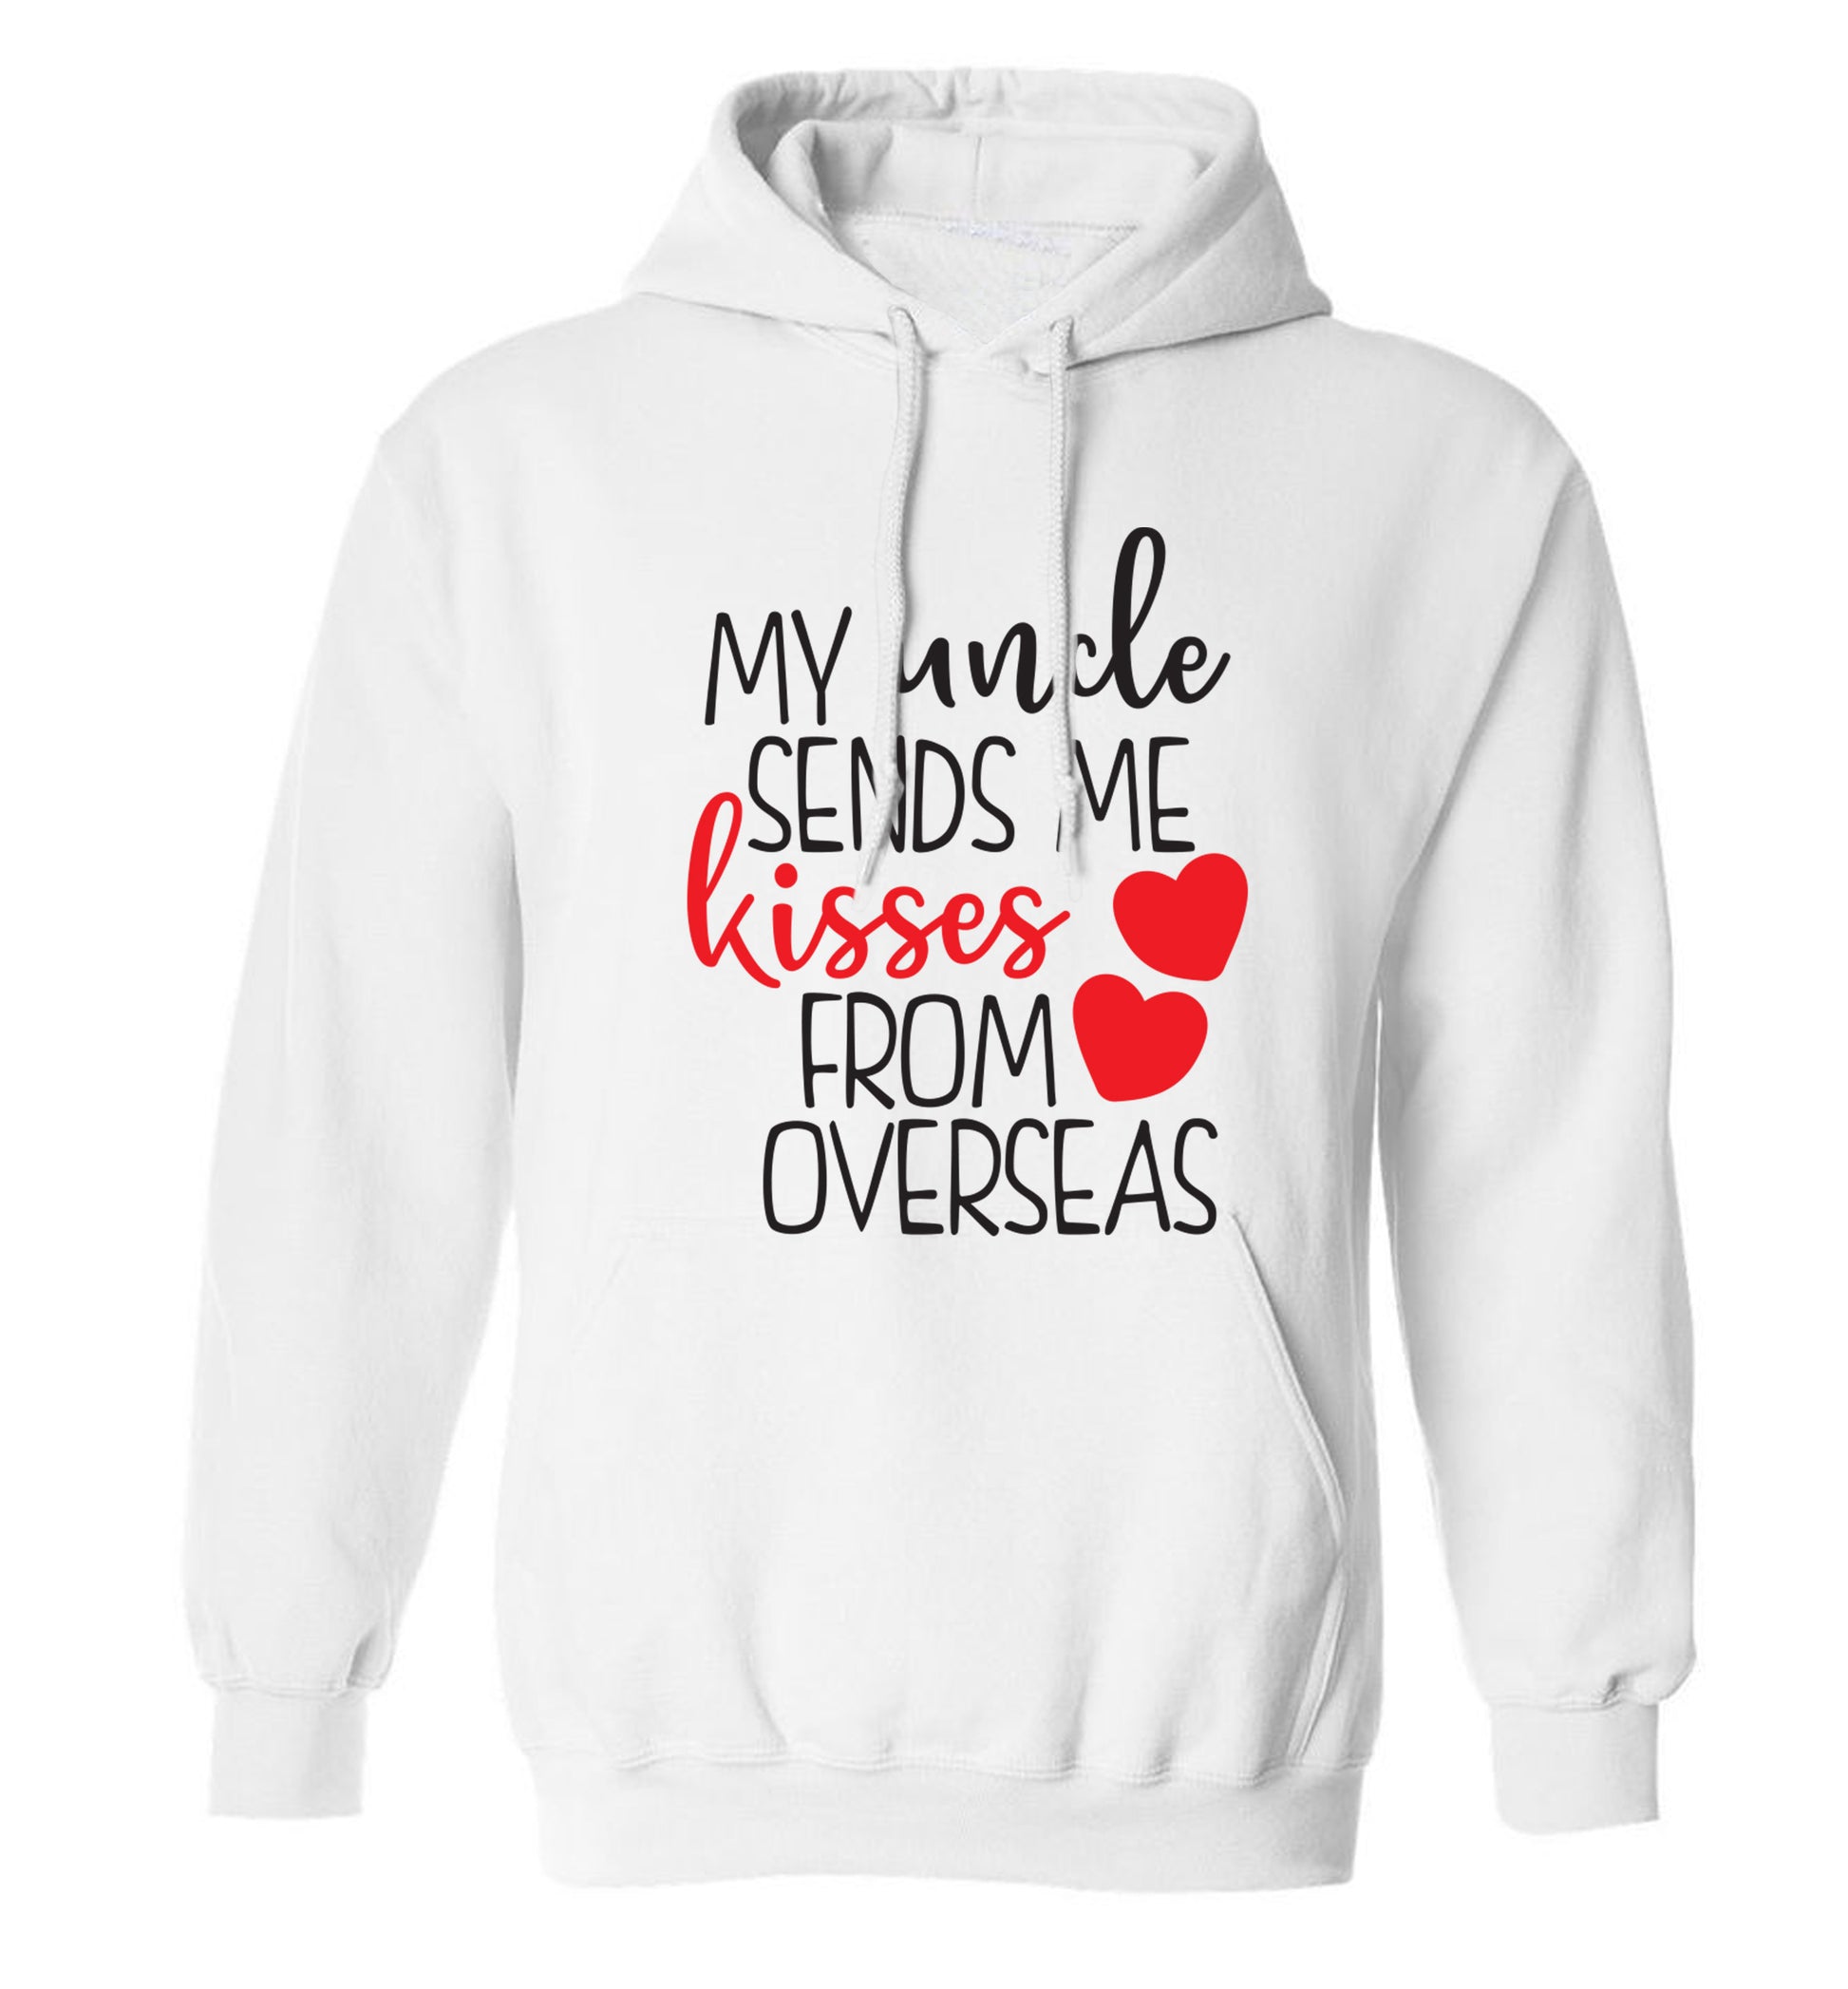 My uncle sends me kisses from overseas adults unisex white hoodie 2XL